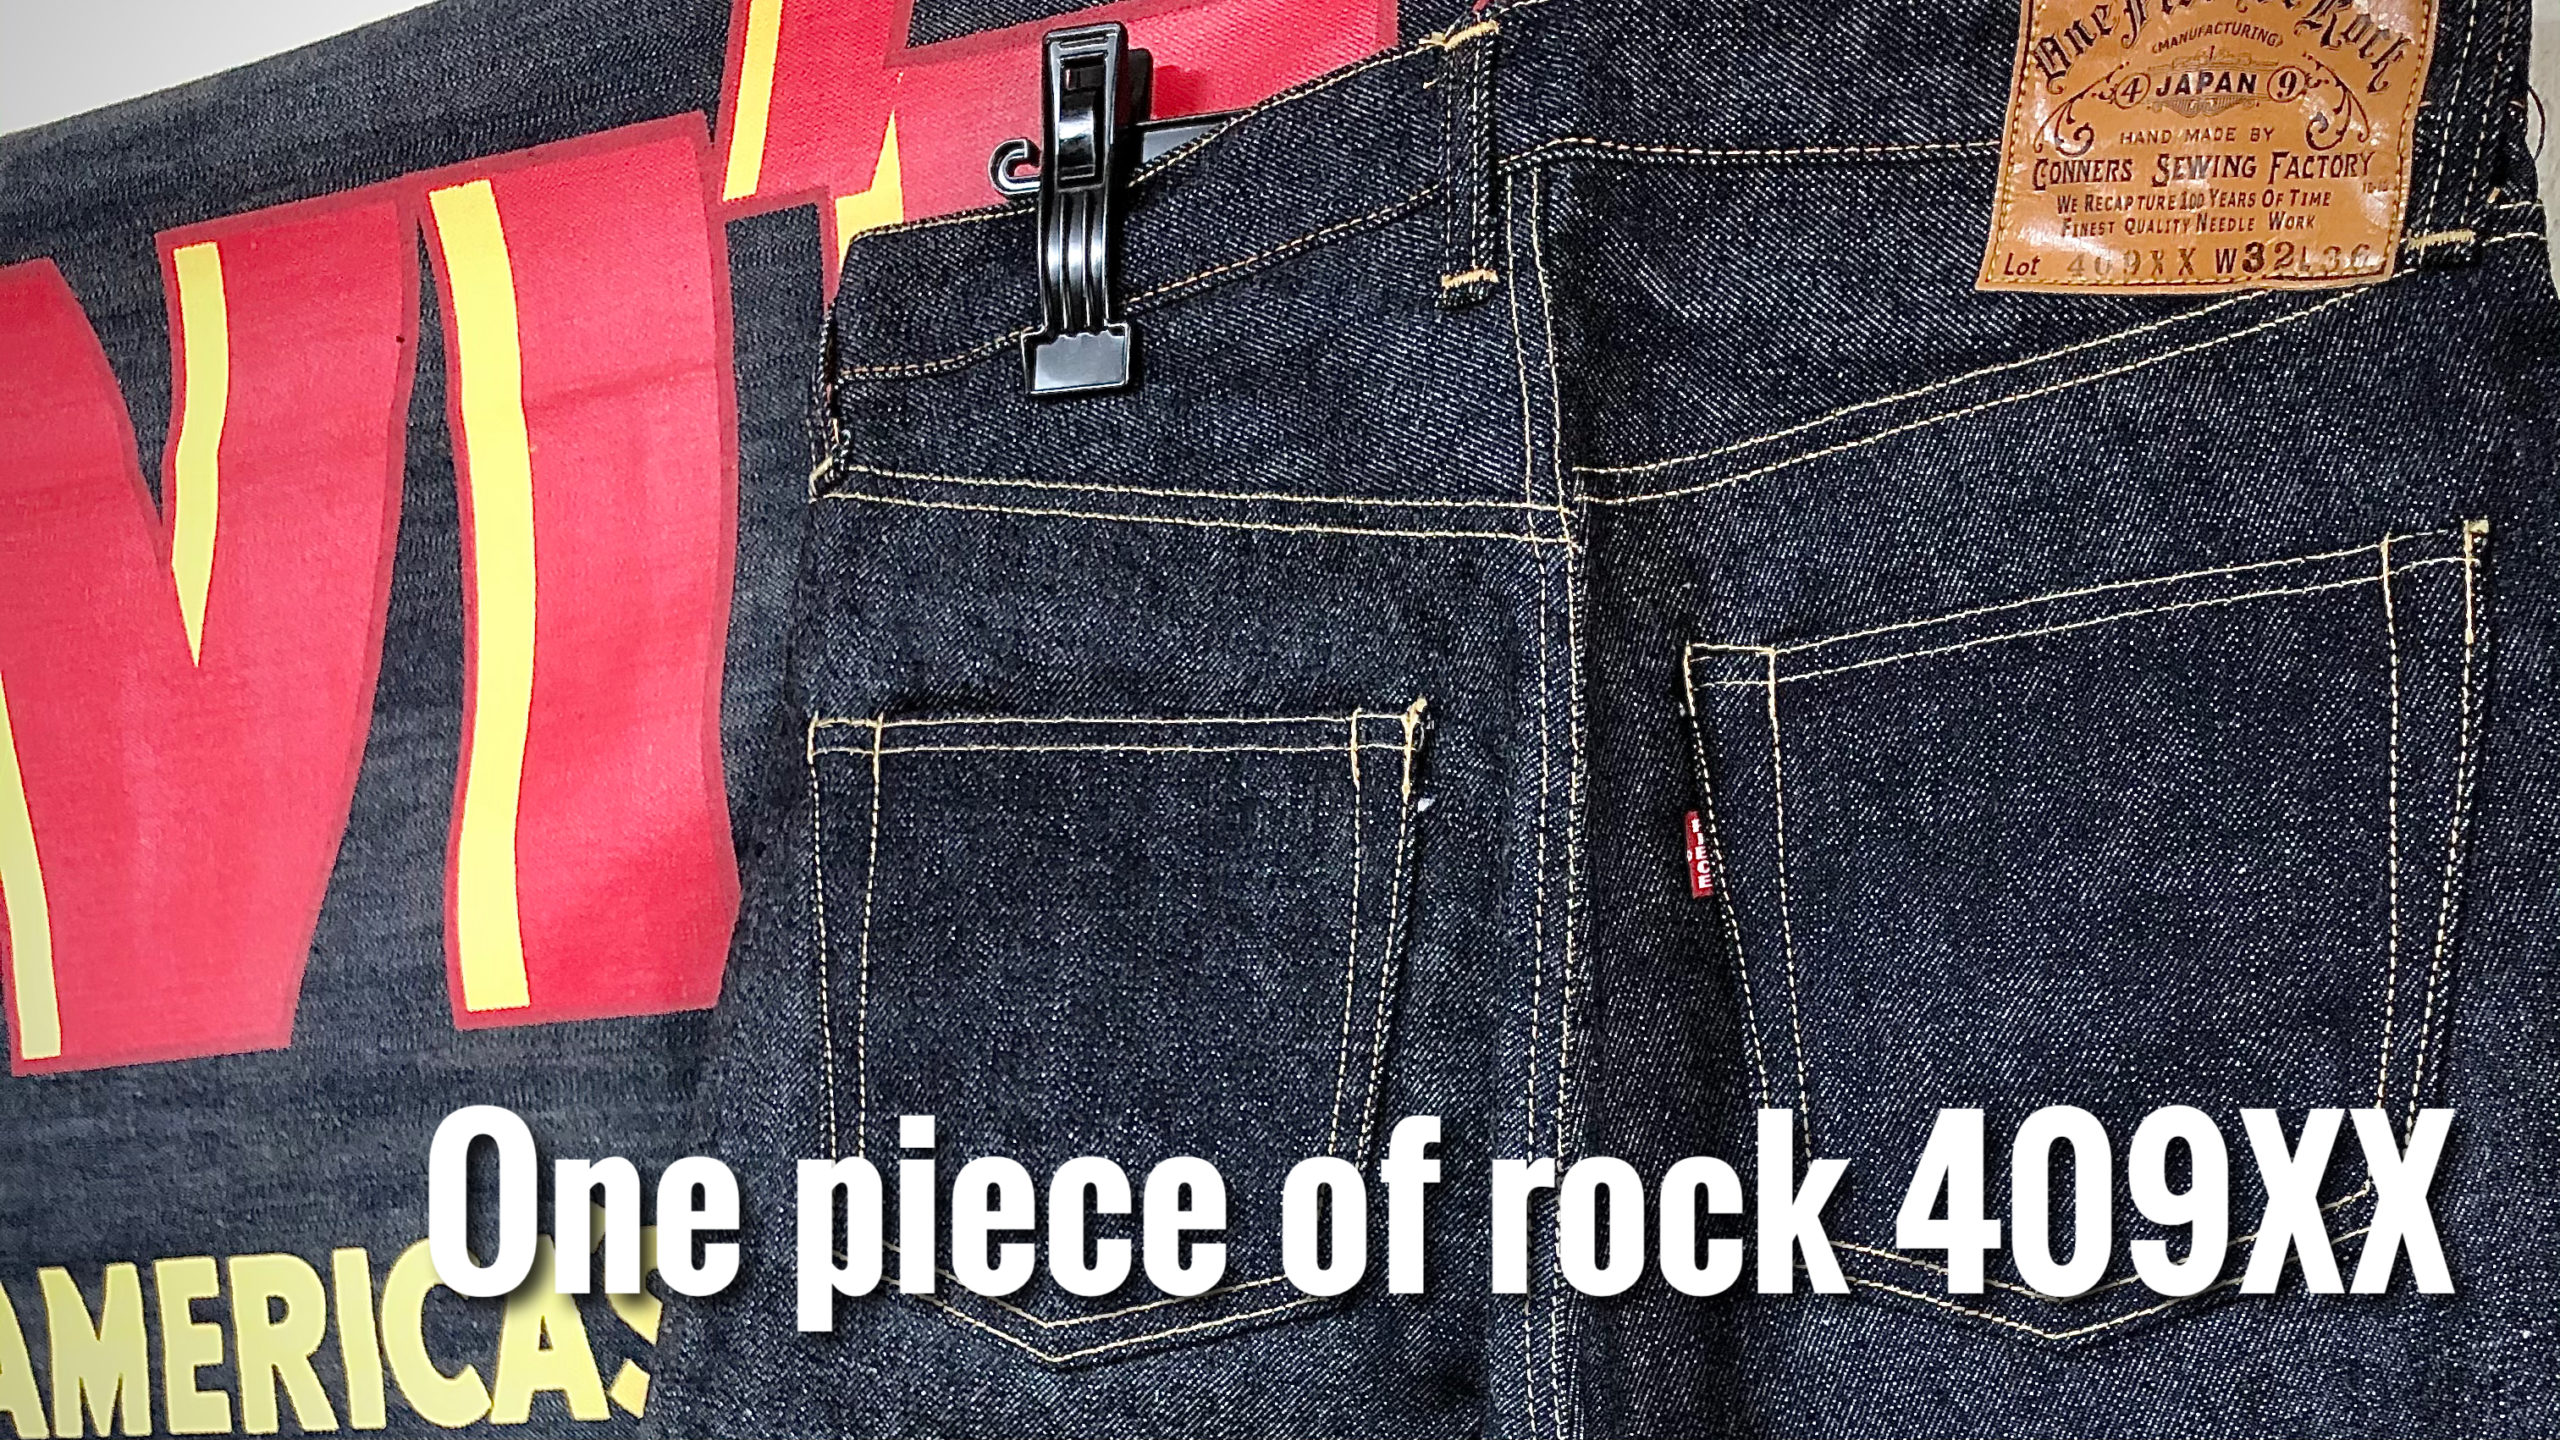 one piece of セットアップ ワンピースオブロック m54 rock